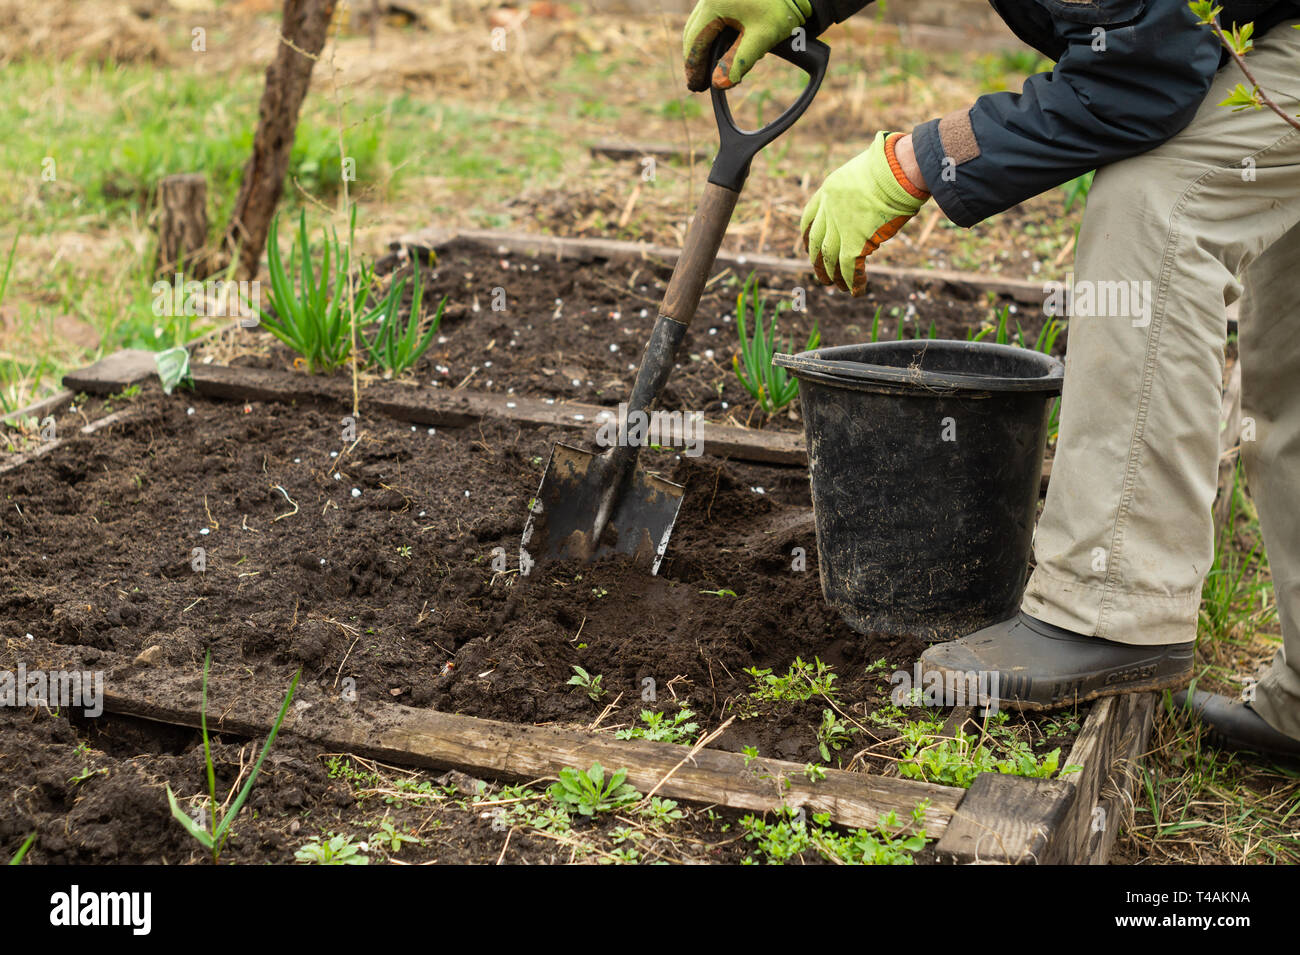 A man is digging a shovel soil in the garden in spring Stock Photo